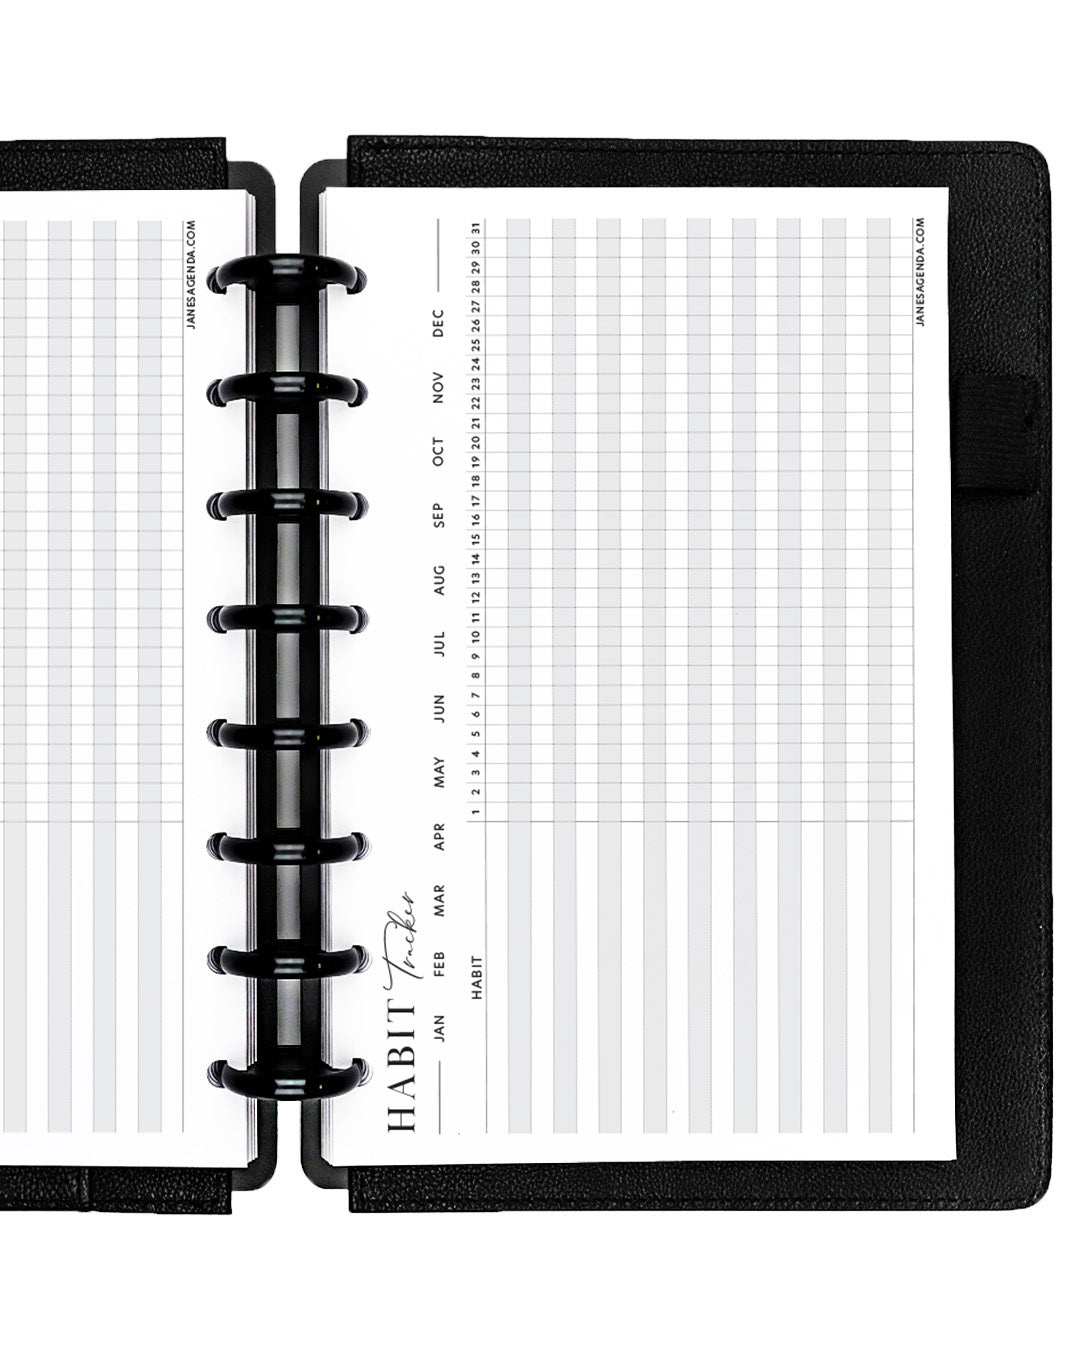 Monthly habits planner inserts for discbound planners, disc notebooks, A5 Ringbound planners, and half-letter unpunched planner sizes by Jane's Agenda.